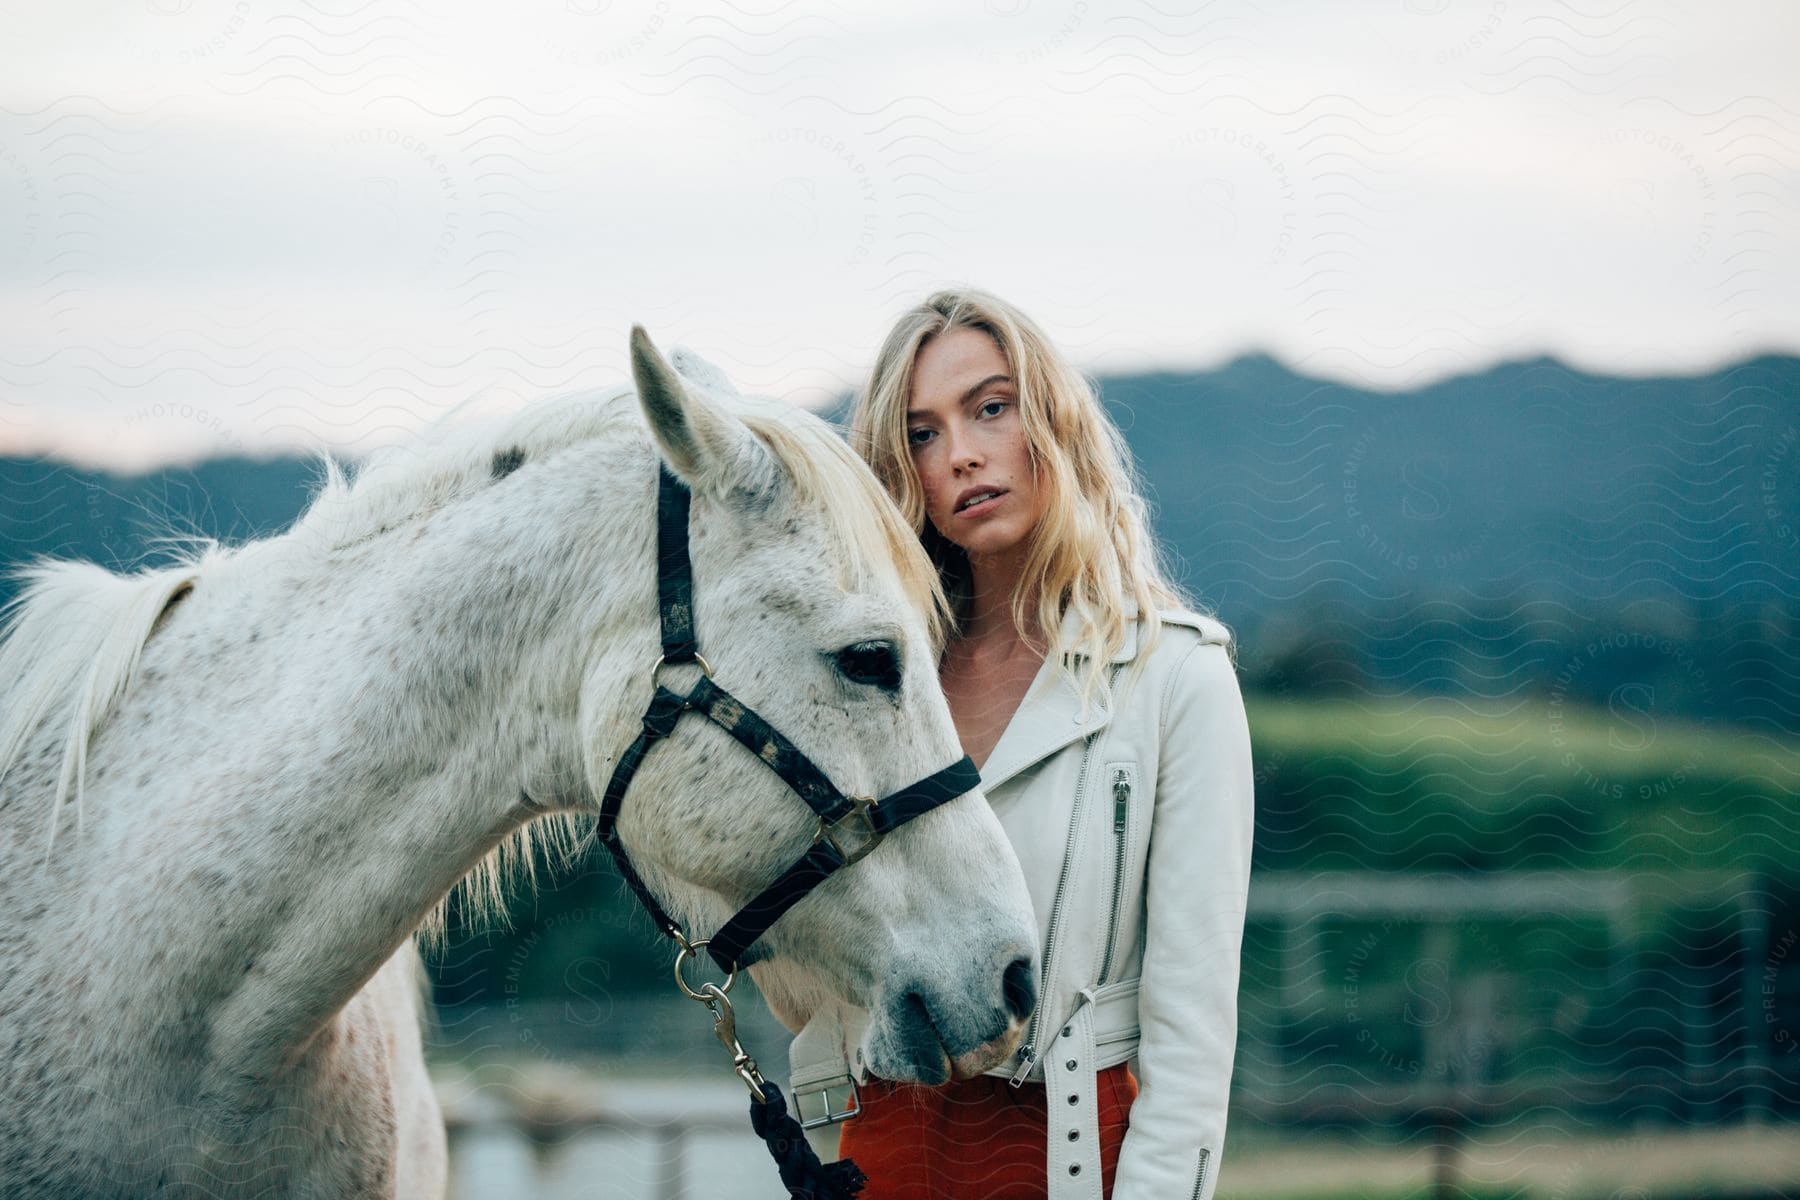 A woman with blonde hair standing next to a horse in the outdoors